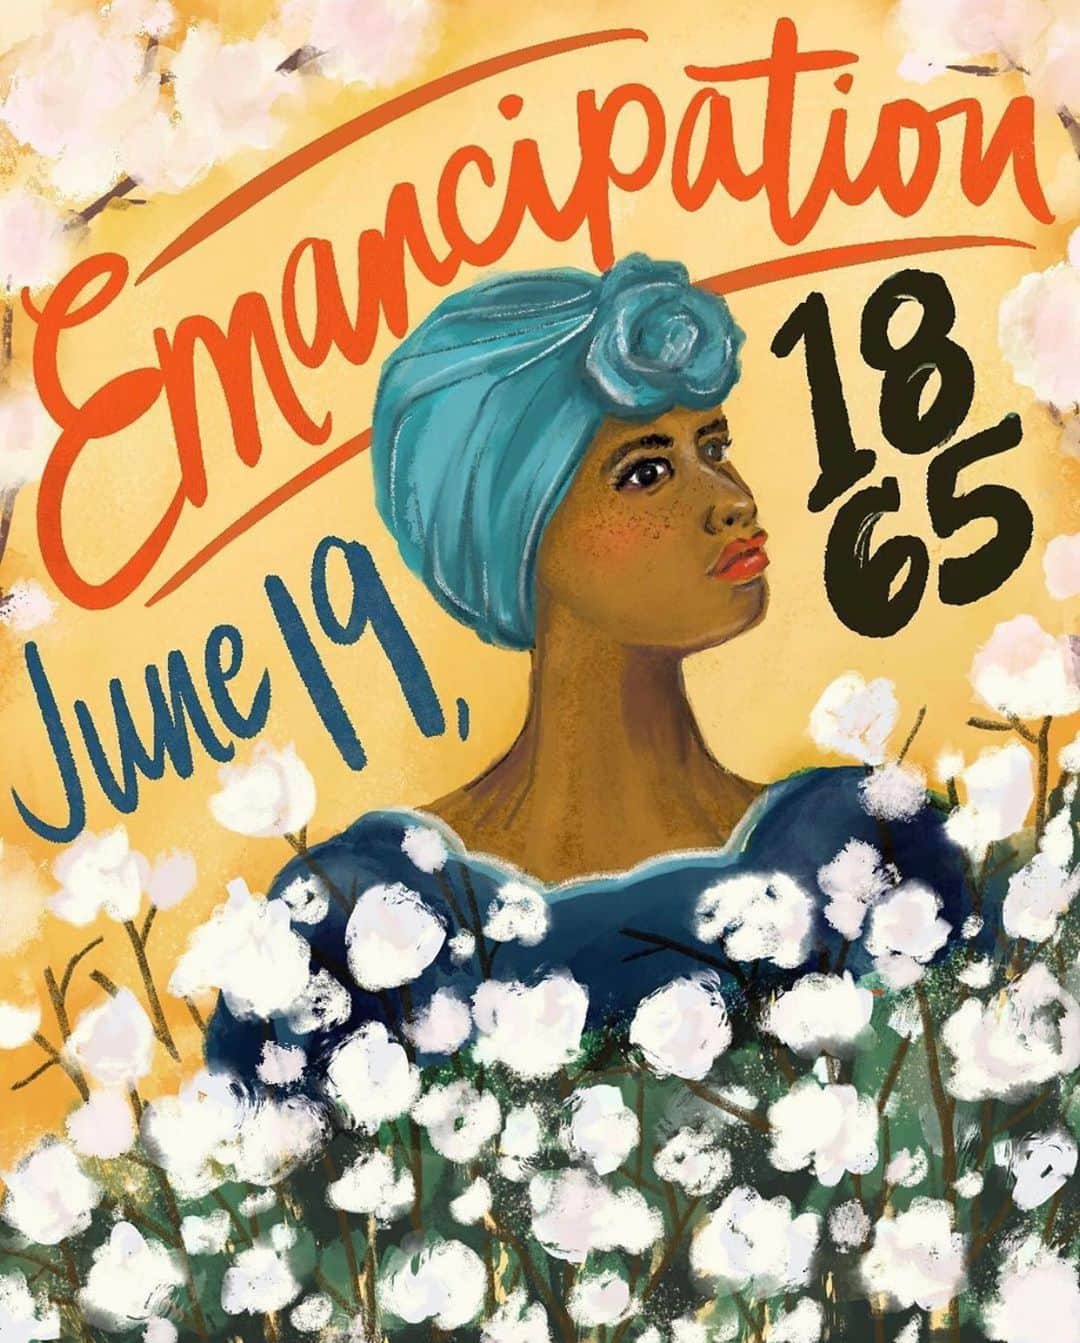 Francesca Realeのインスタグラム：「In honor of Juneteenth I wanted to share this unbelievably beautiful work of art by @nettdesigns .  June 19th 1865 commemorates the day when enslaved people of Texas finally learned slavery had been abolished and that they were free. This holiday represents the end to slavery and is a symbol of  total freedom from slave trade across all states including Texas. I did not learn about Juneteenth in school growing up but I really wish I had.  Continue to read, to listen, to educate yourself, to celebrate and amplify black voices and black history not just today but everyday! Black history and black lives matter now and forever.」